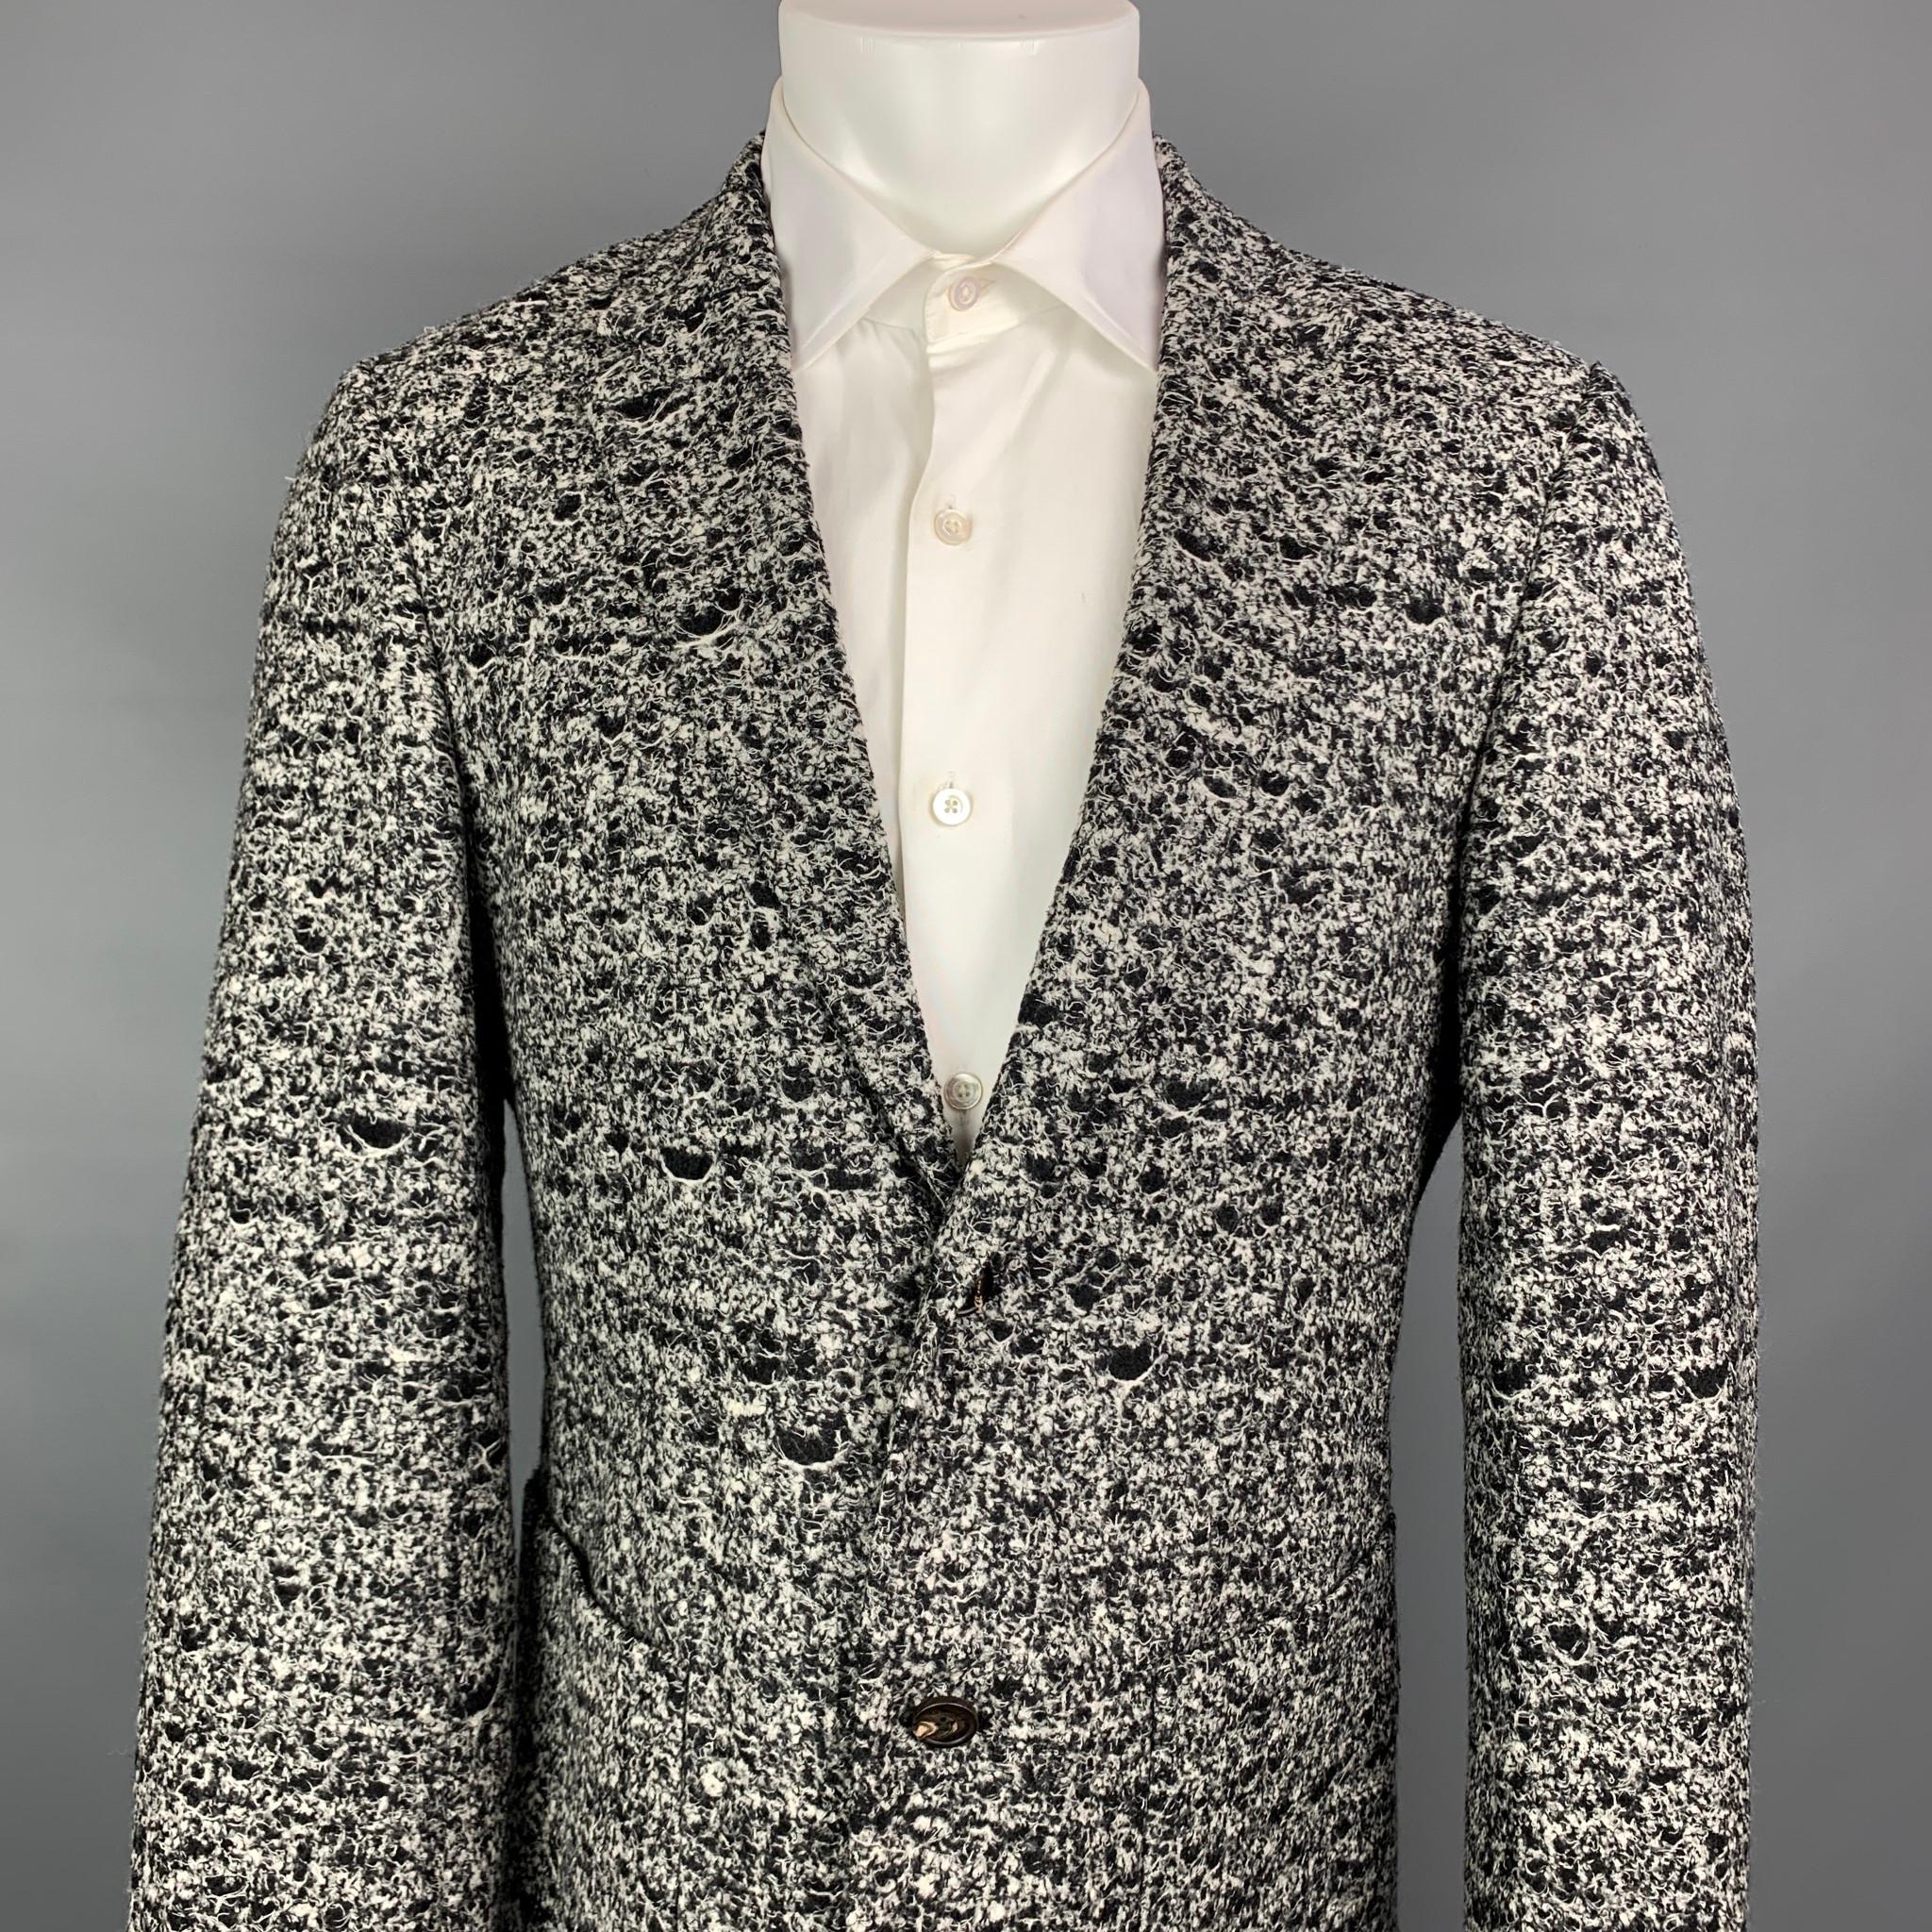 CALVIN KLEIN COLLECTION sport coat comes in a black & white tweed wool / polyamide with a half liner featuring a notch lapel, patch pockets, and a two button closure. Made in Italy.

Very Good Pre-Owned Condition.
Marked: